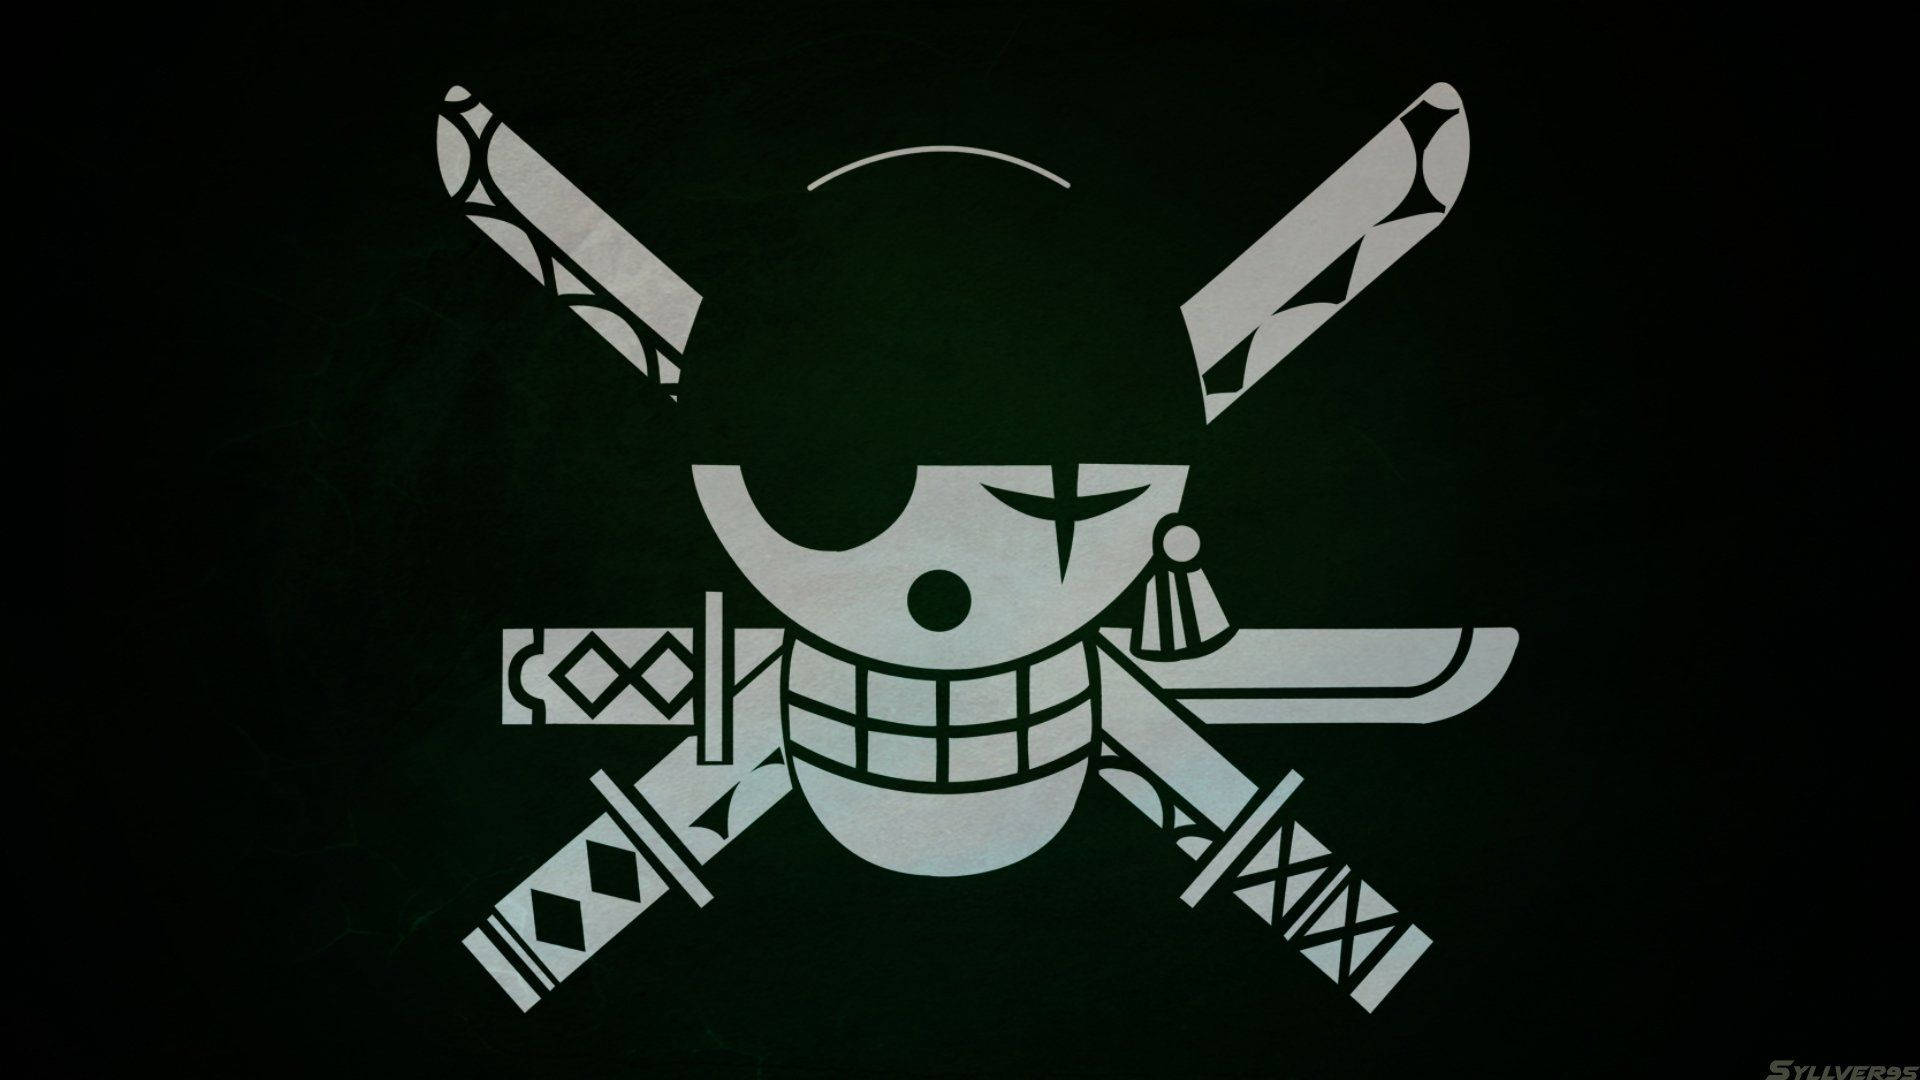 The iconic jolly roger flag of Zoro, the legendary pirate and one of the main characters of the popular anime 